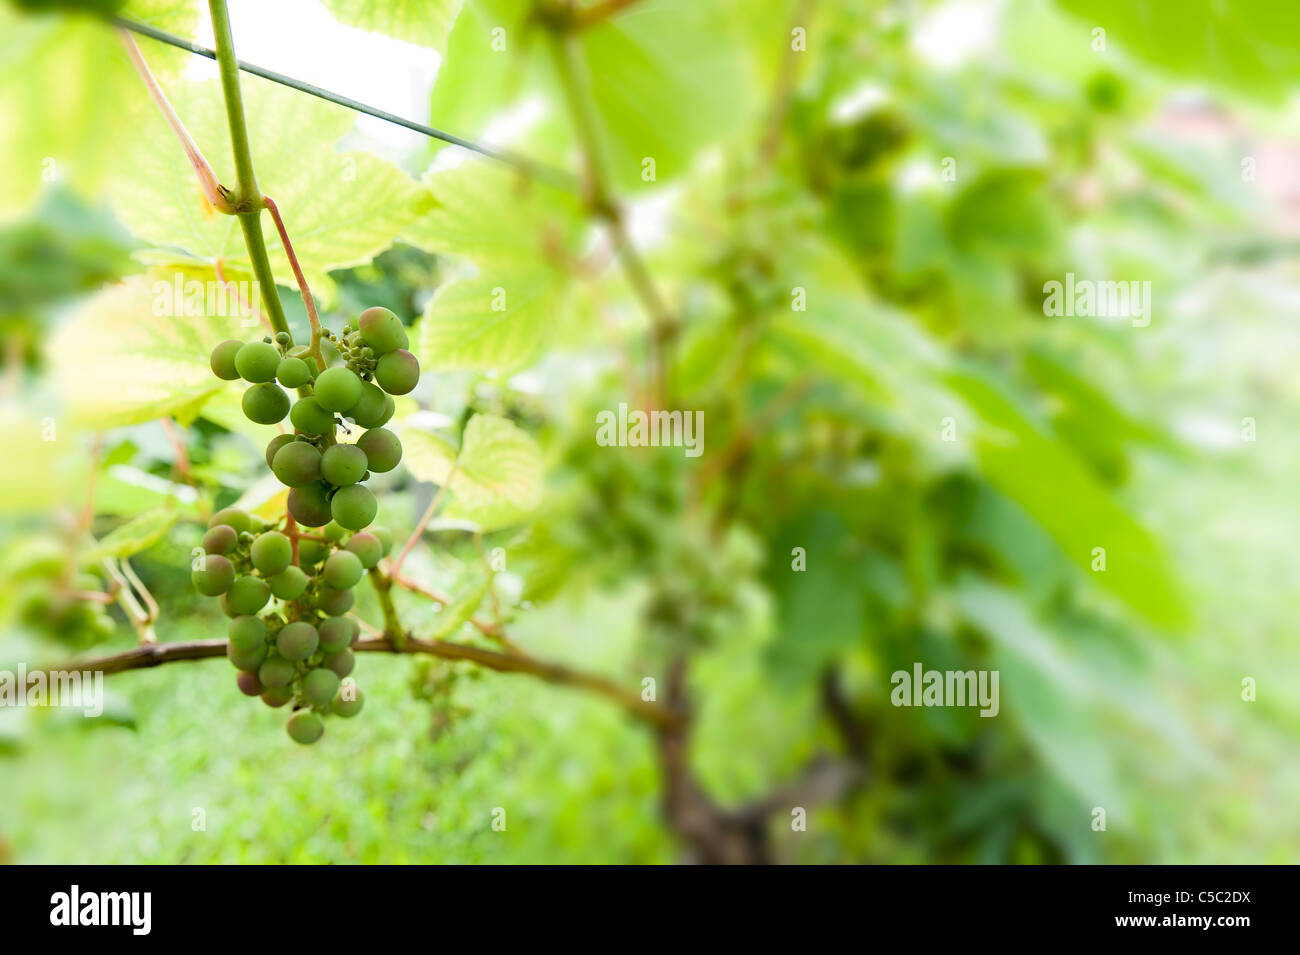 Close-up of unripe green grapes at blurred vineyard Stock Photo